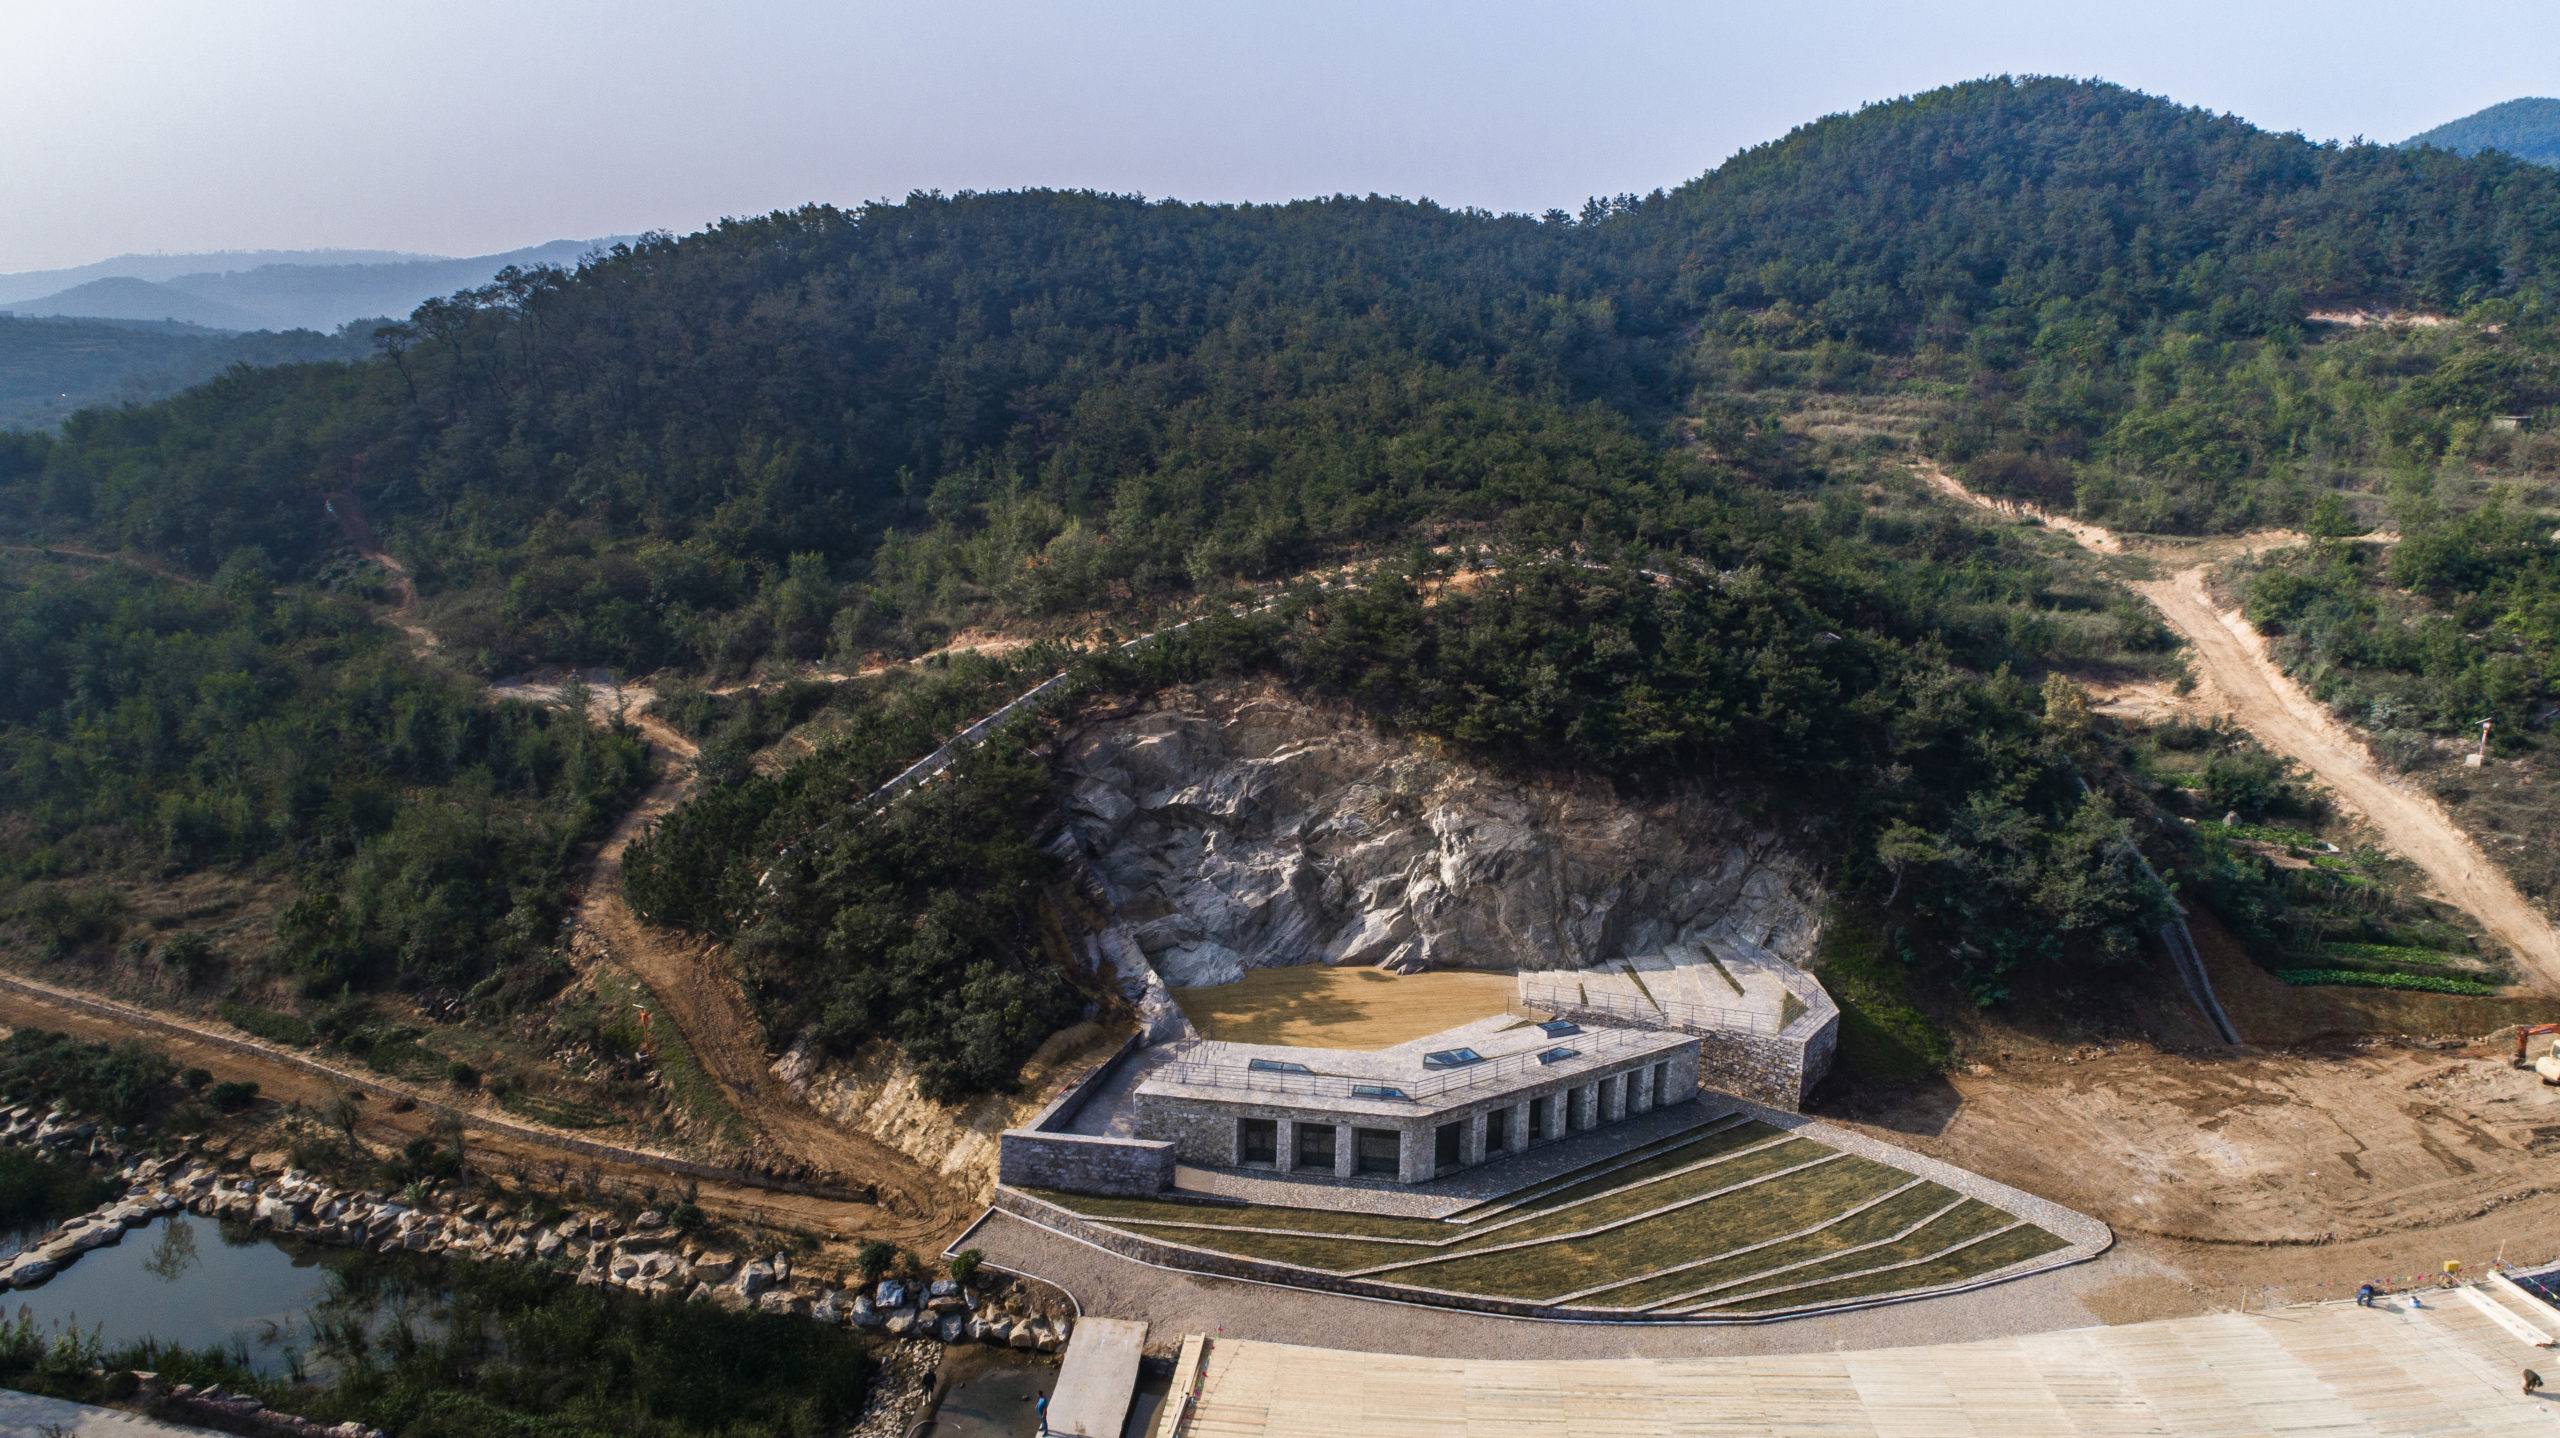 one-time abandoned stone quarry has been transformed into an open-air amphitheater and public community space